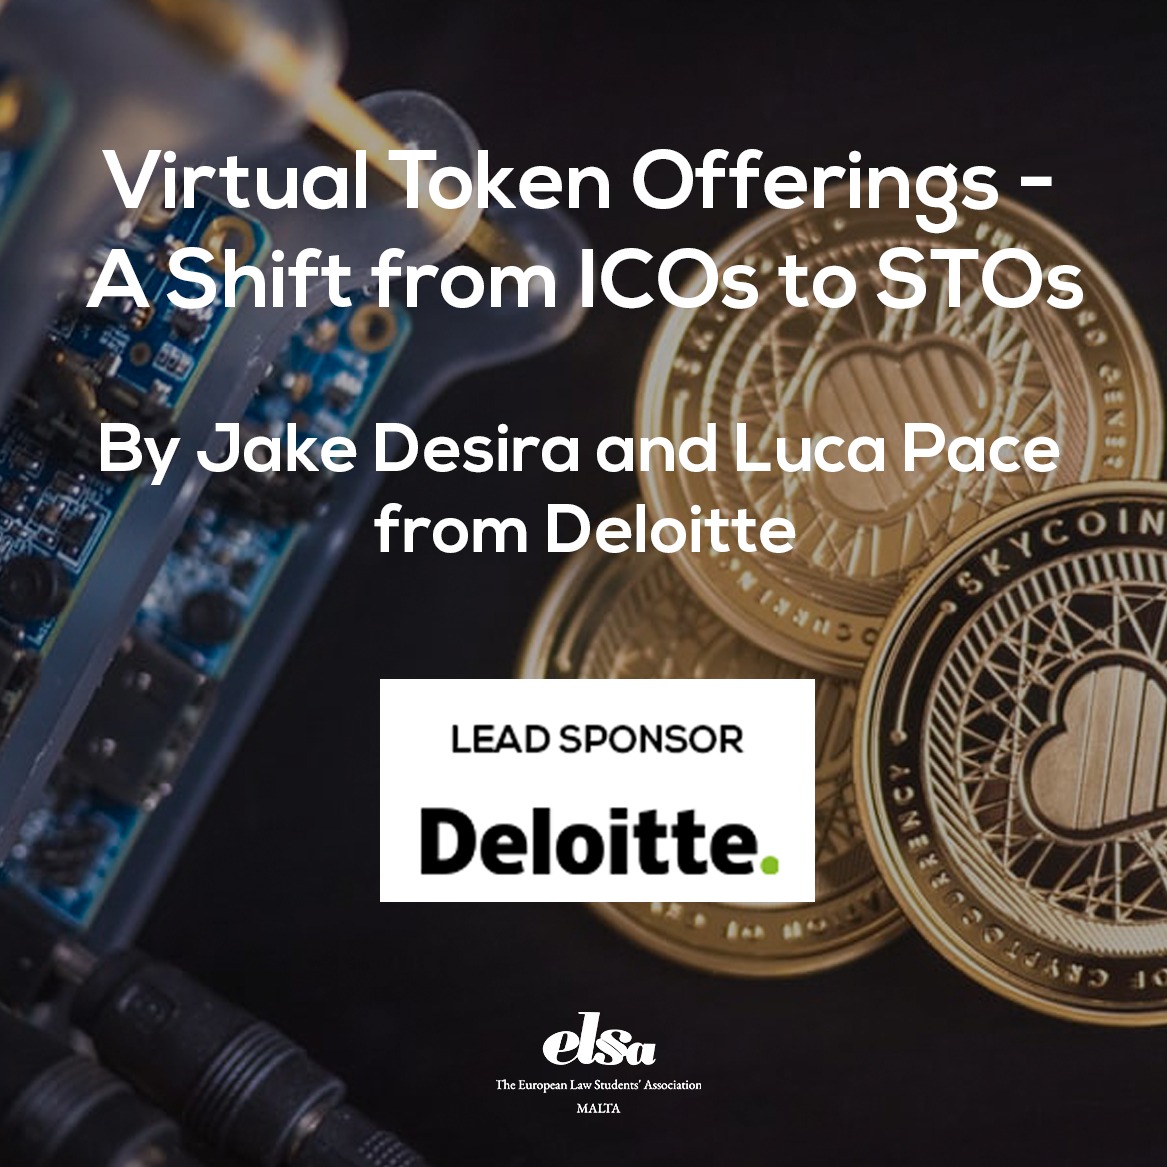 Virtual Token Offerings – A shift from ICO to STOs